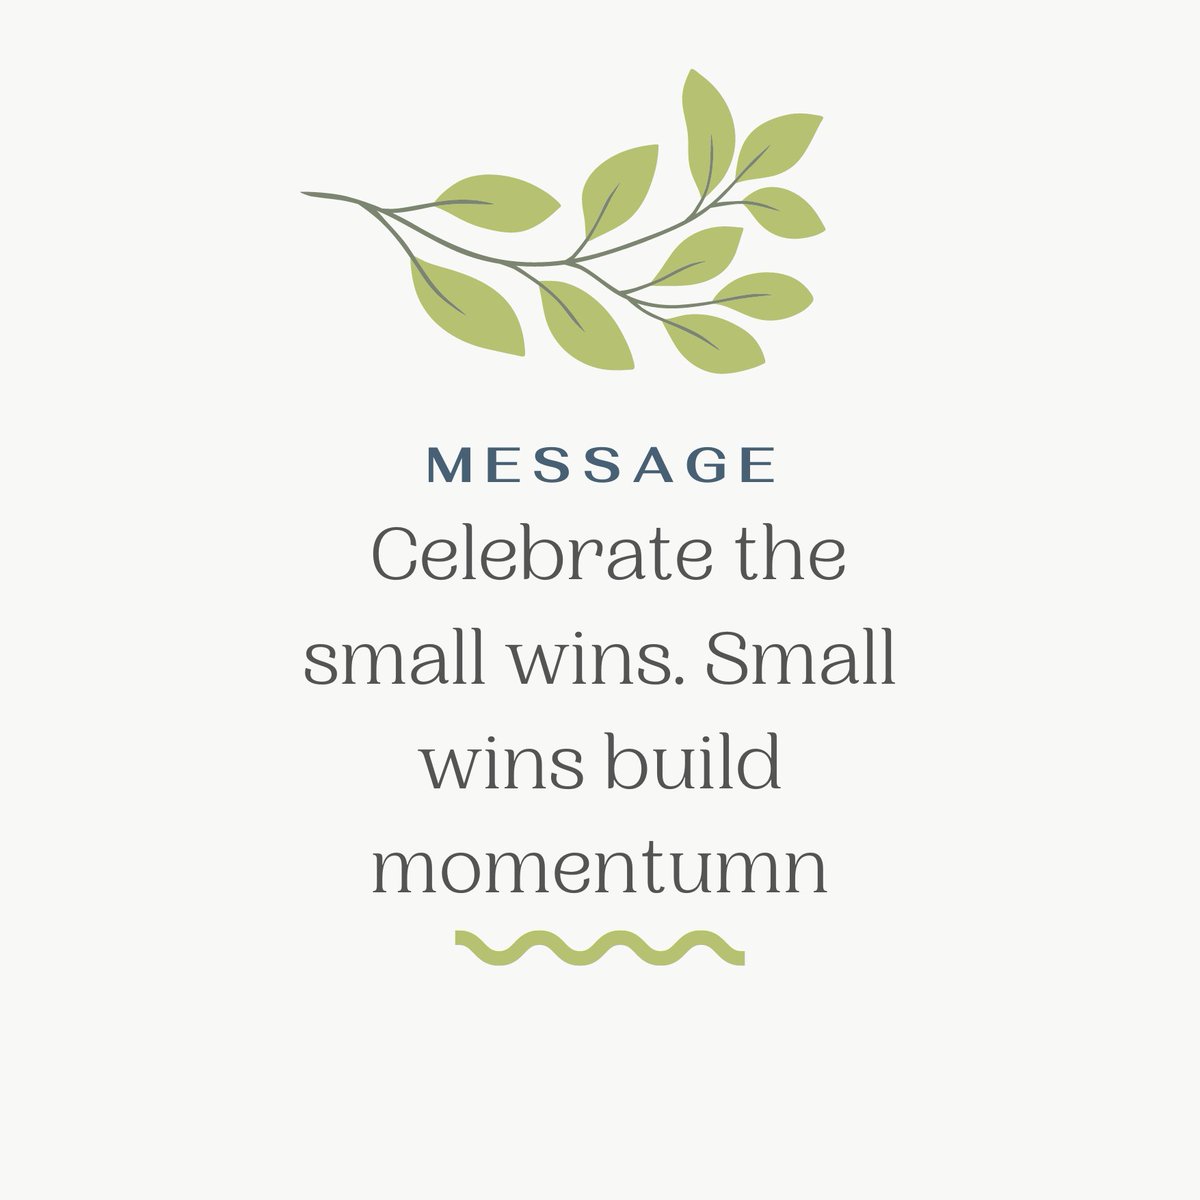 Celebrate every small victory on your journey, for these small wins are the building blocks of unstoppable momentum. 🎉💪

#SmallWinsCelebration #MomentumBuilding #SuccessJourney #AchievementUnlocked #CelebrateProgress